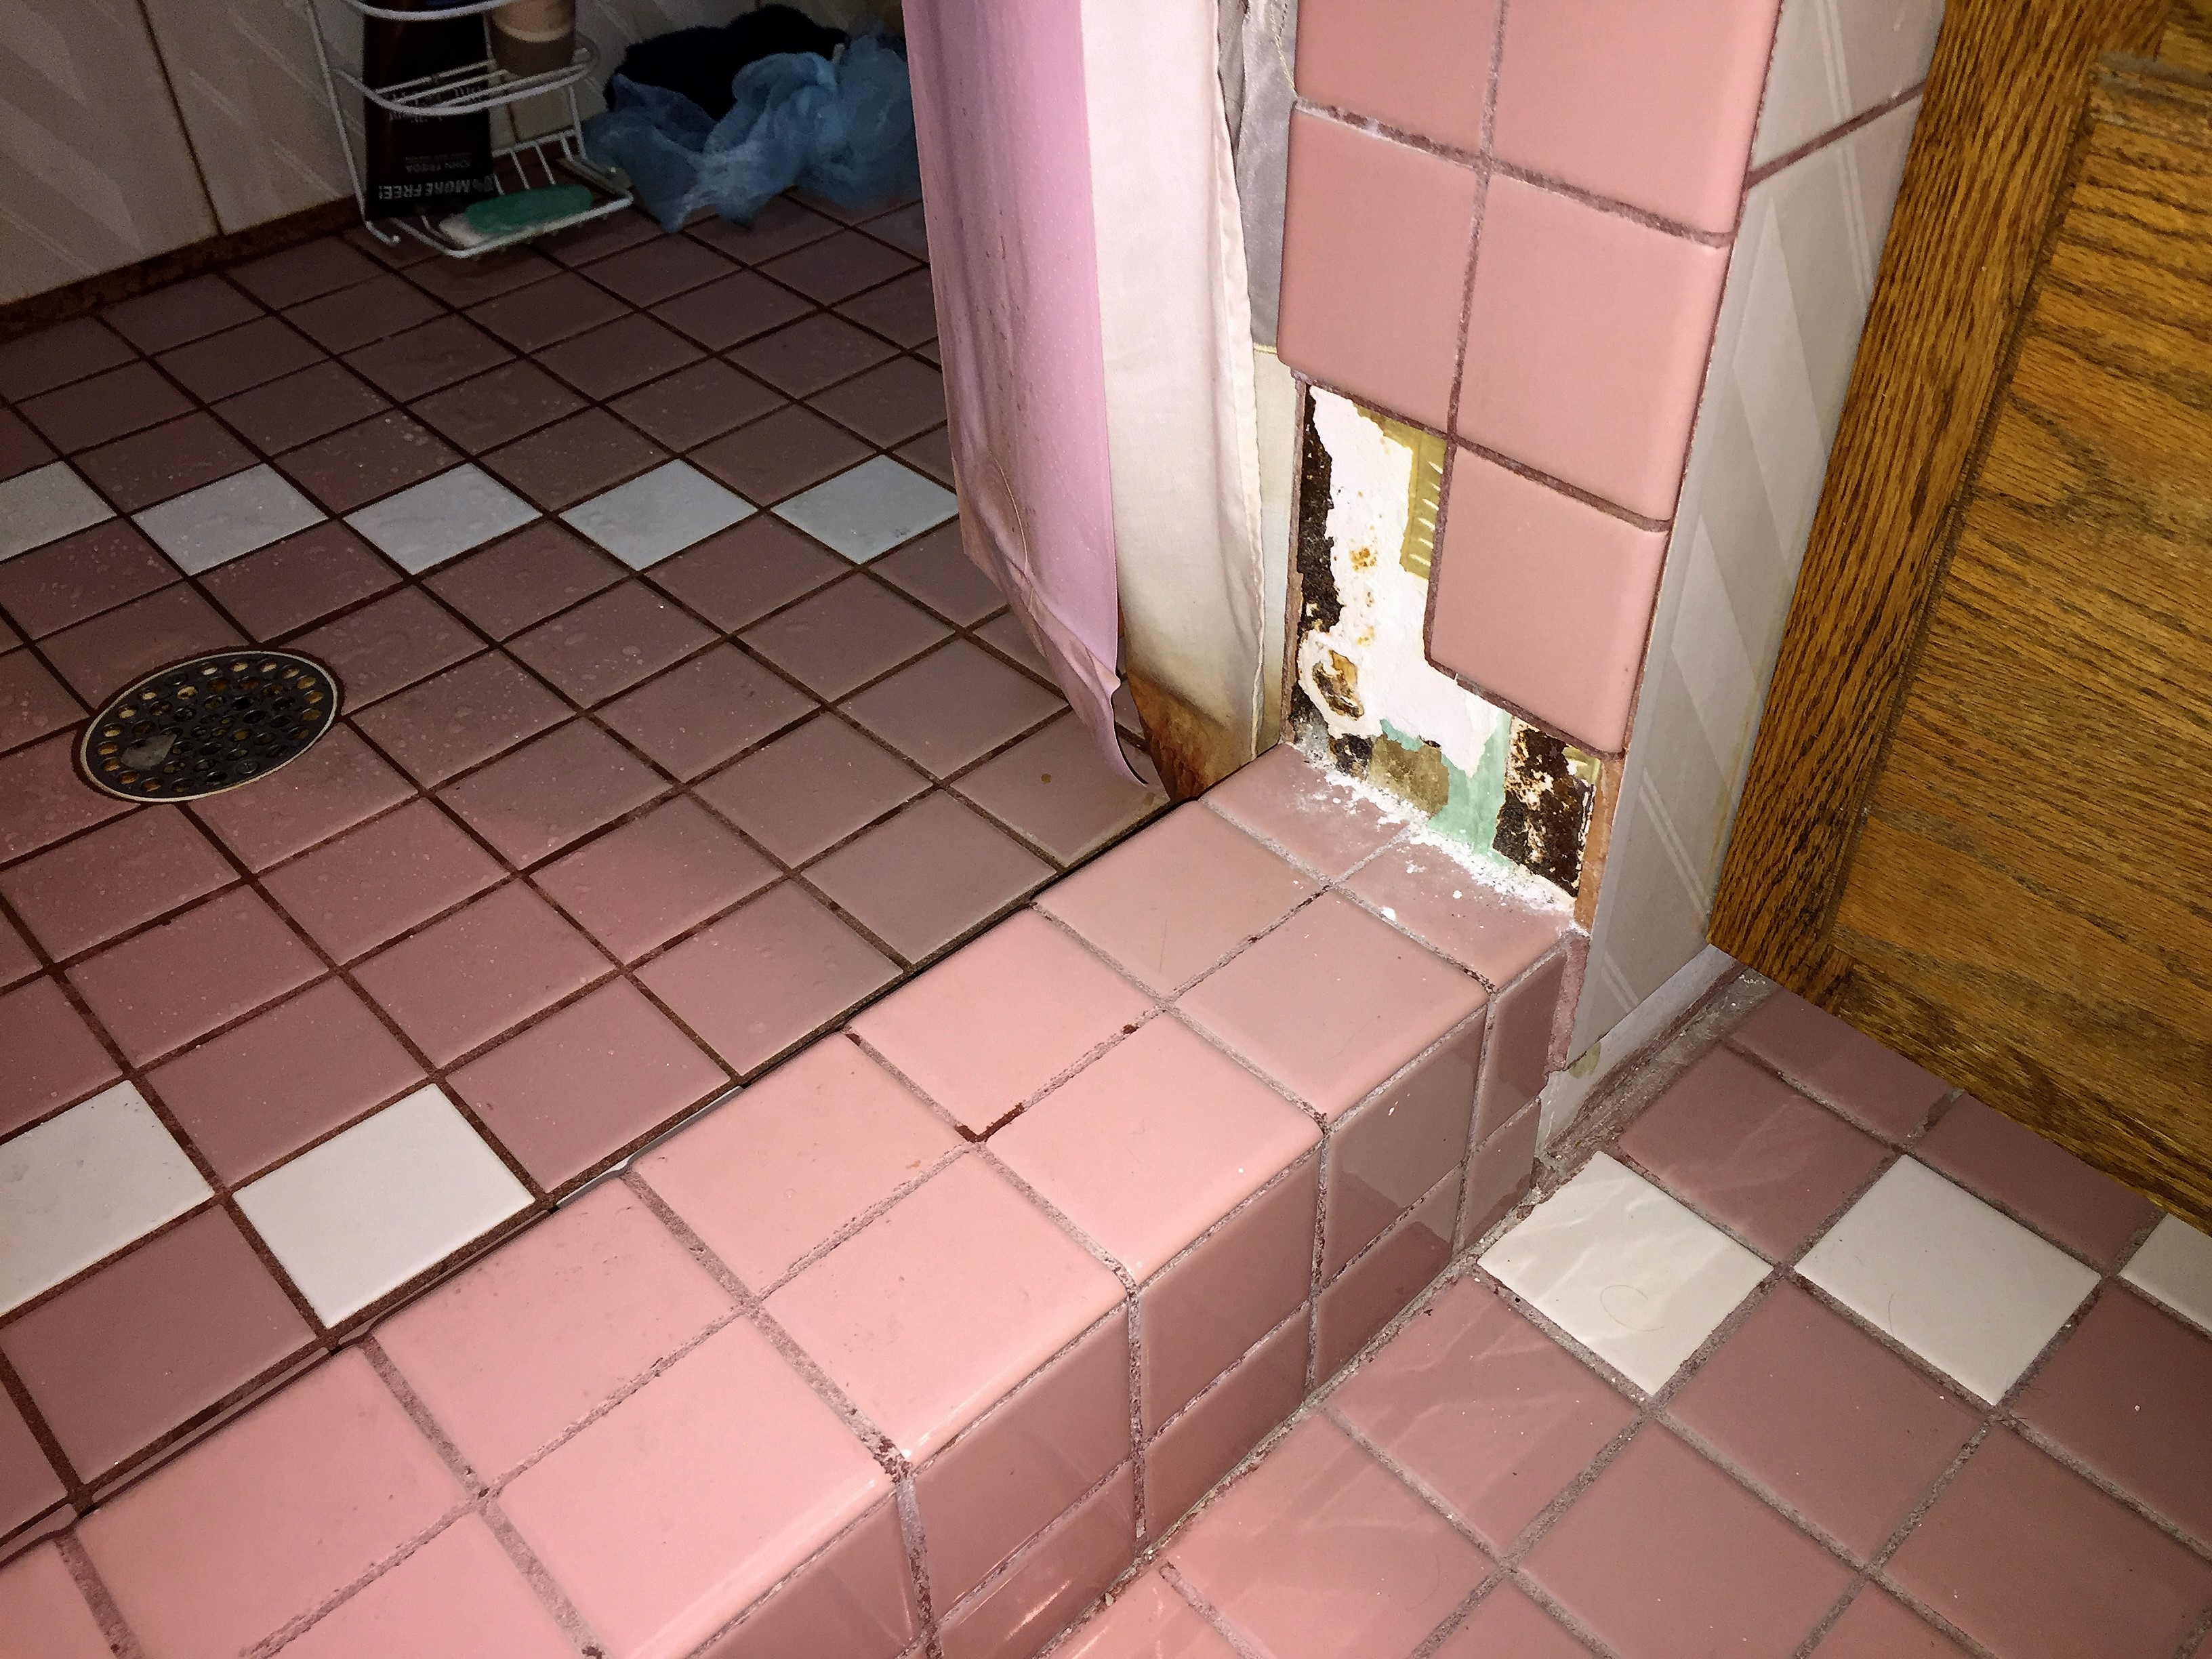 Ugly old pink floor tiles with damage before bathroom remodel